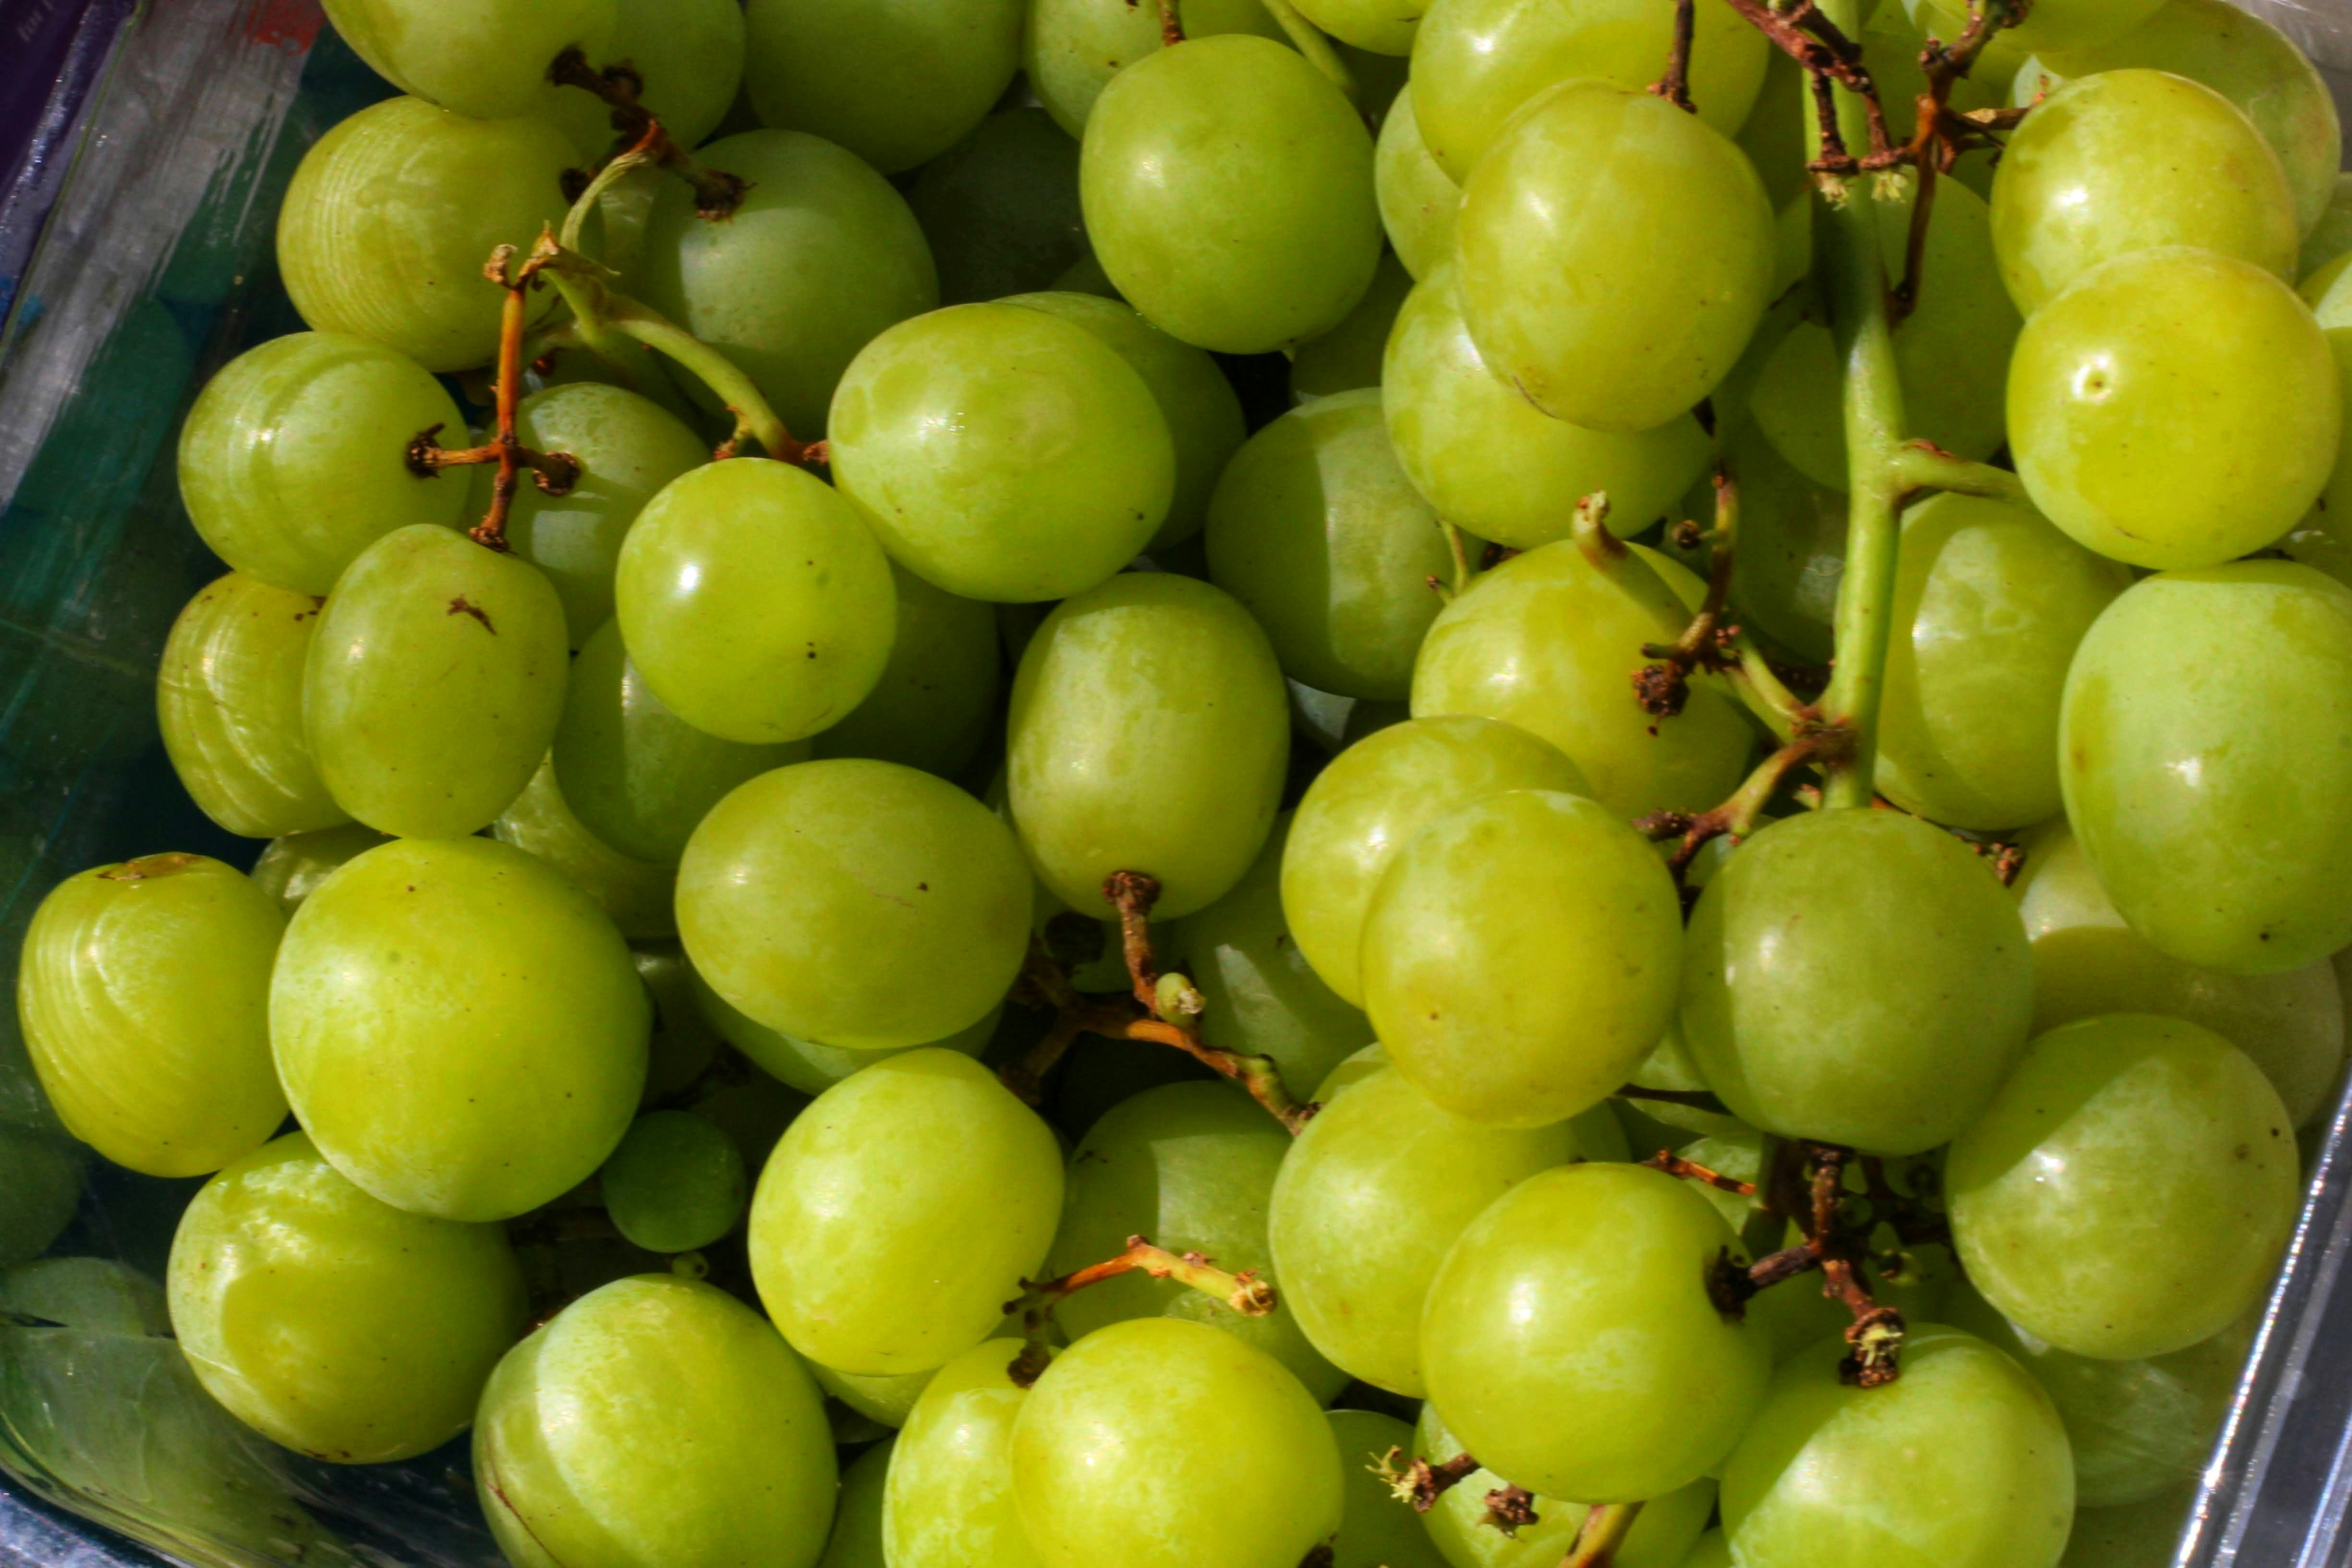 Green grapes calories and nutrition facts 